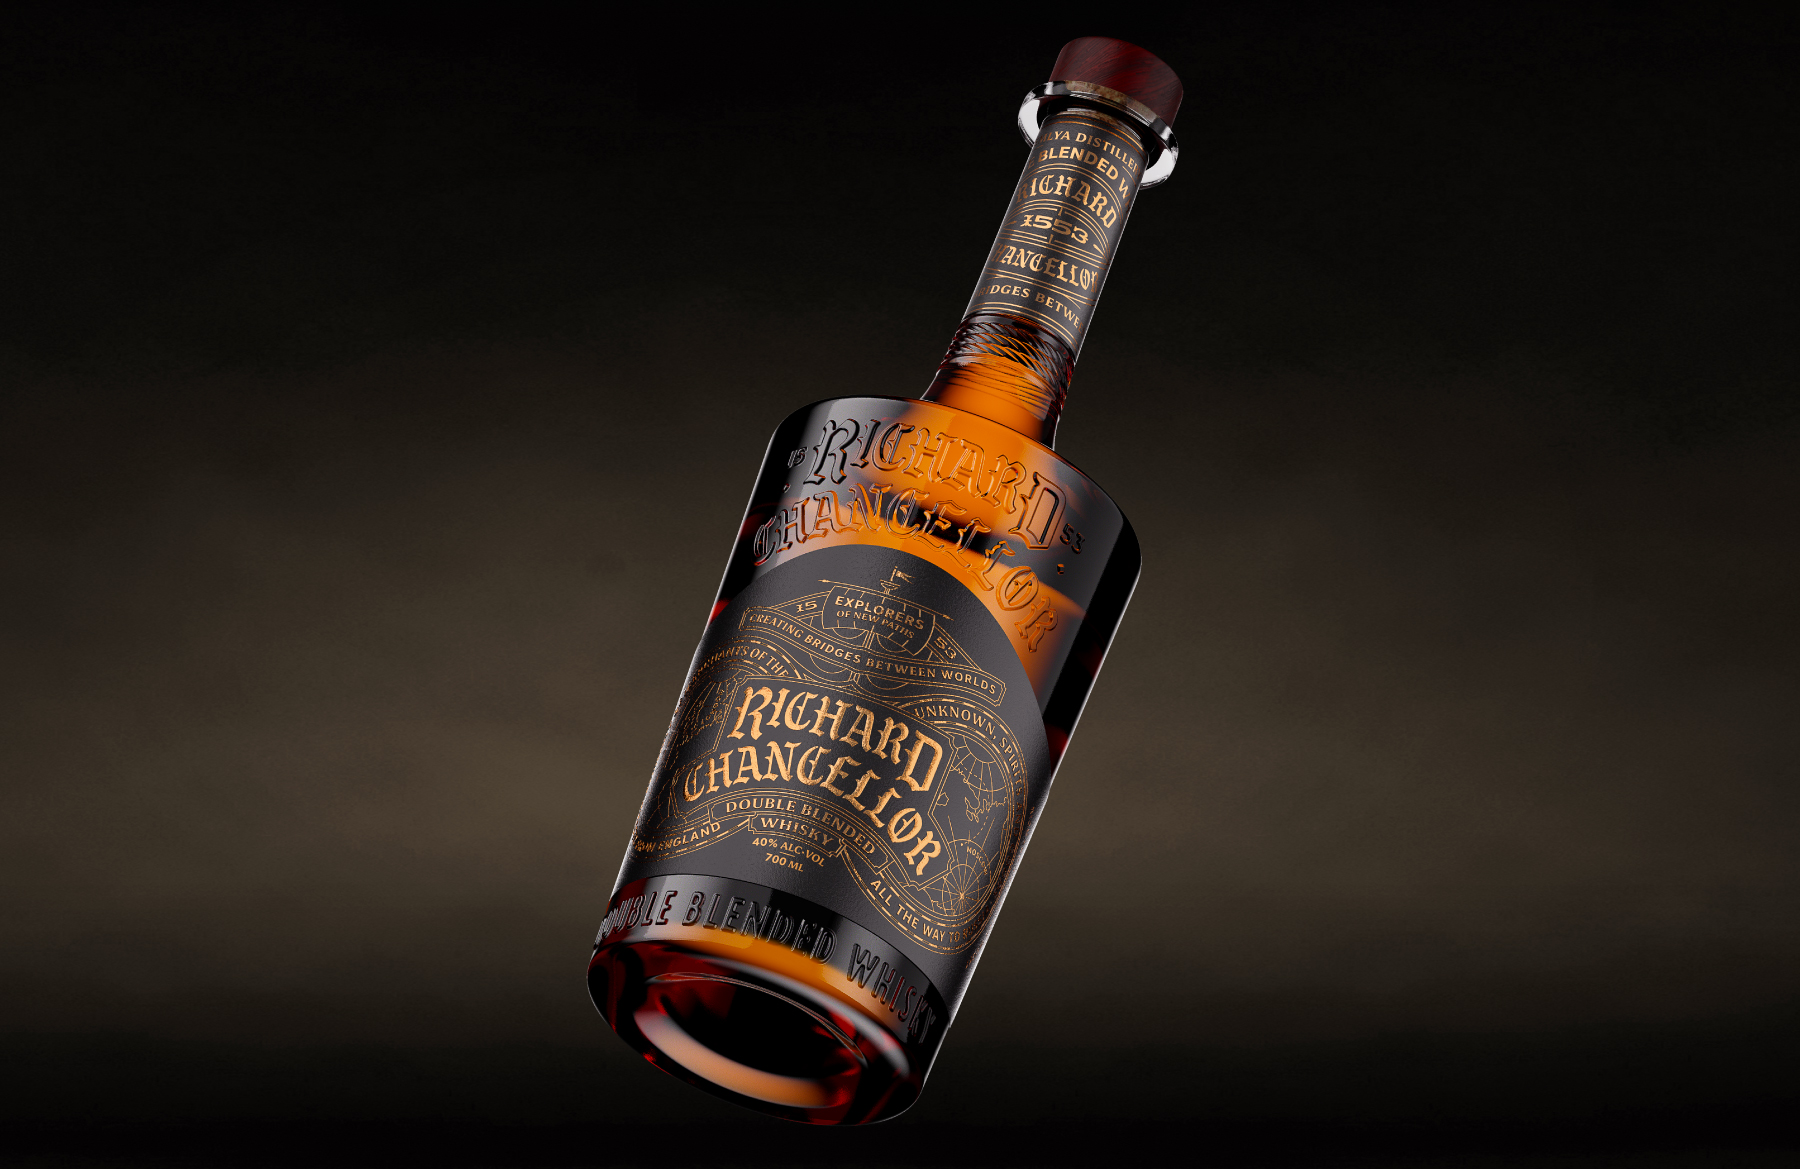 Richard Chancellor: Defiant Seas, Unveiled Paths, and a Bold New Whisky that Tells the Whole Story Behind